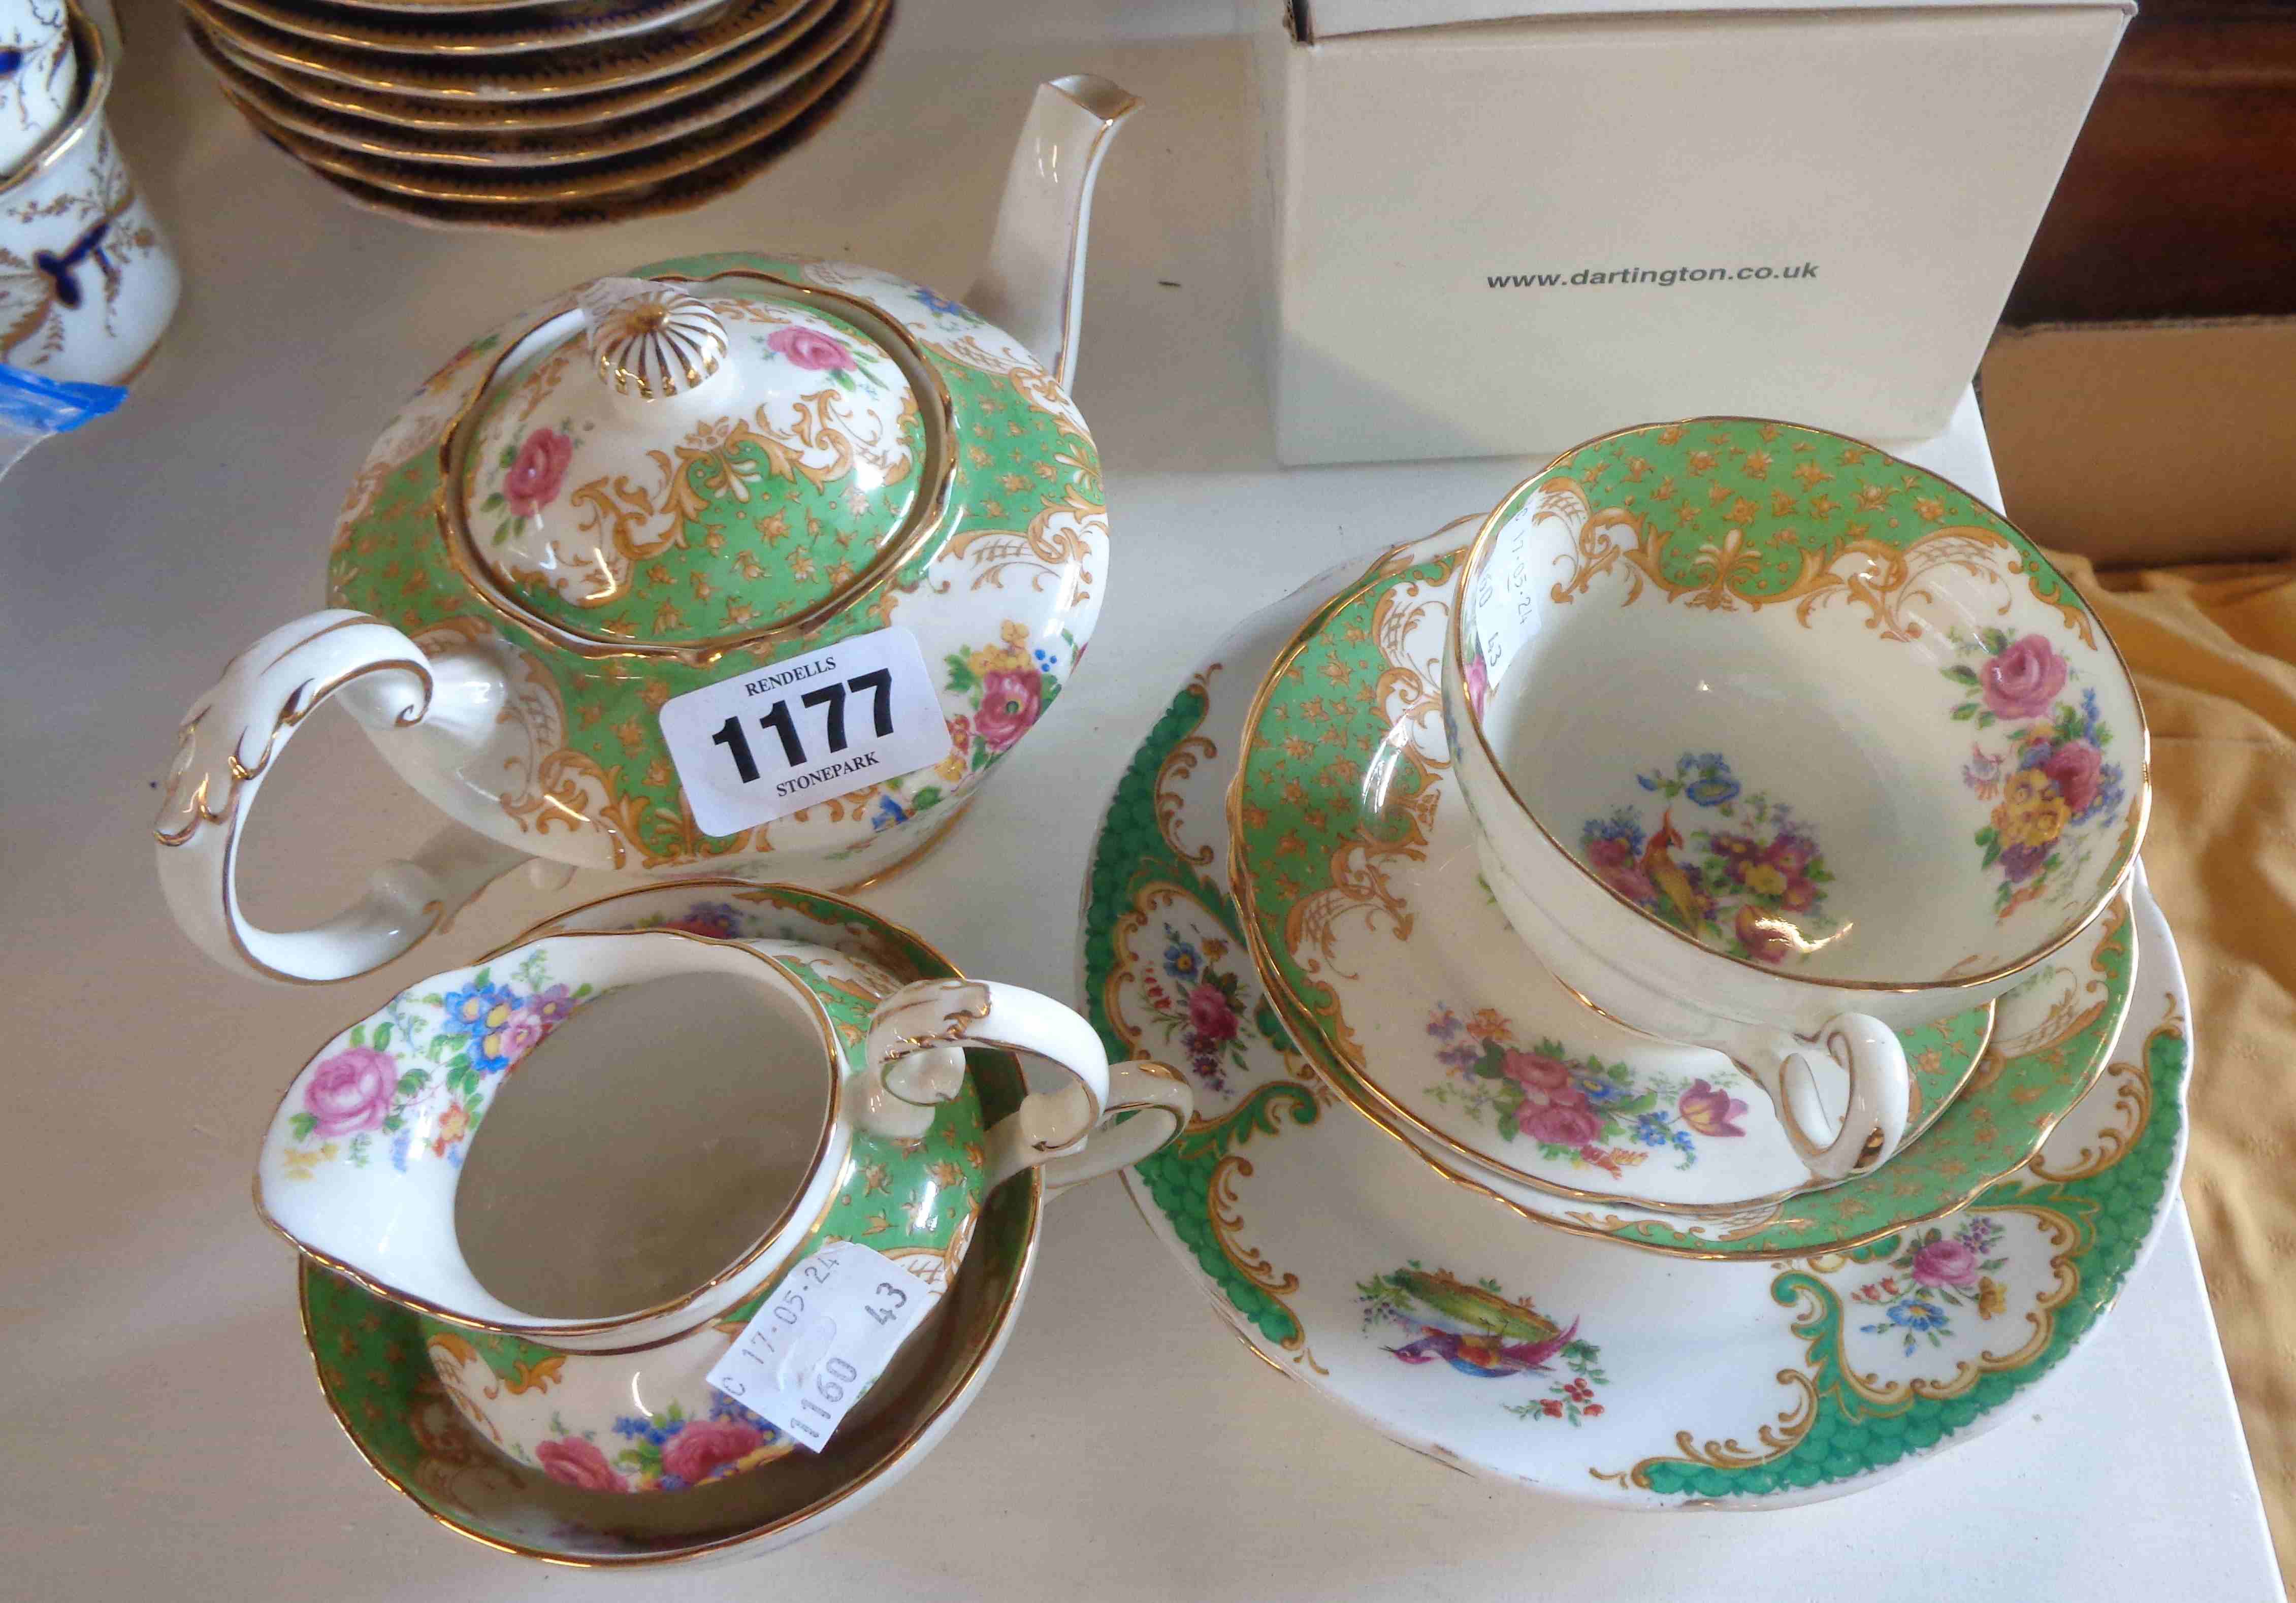 A small quantity of Paragon bone china tableware including teapot, cup and saucer, etc. - sold